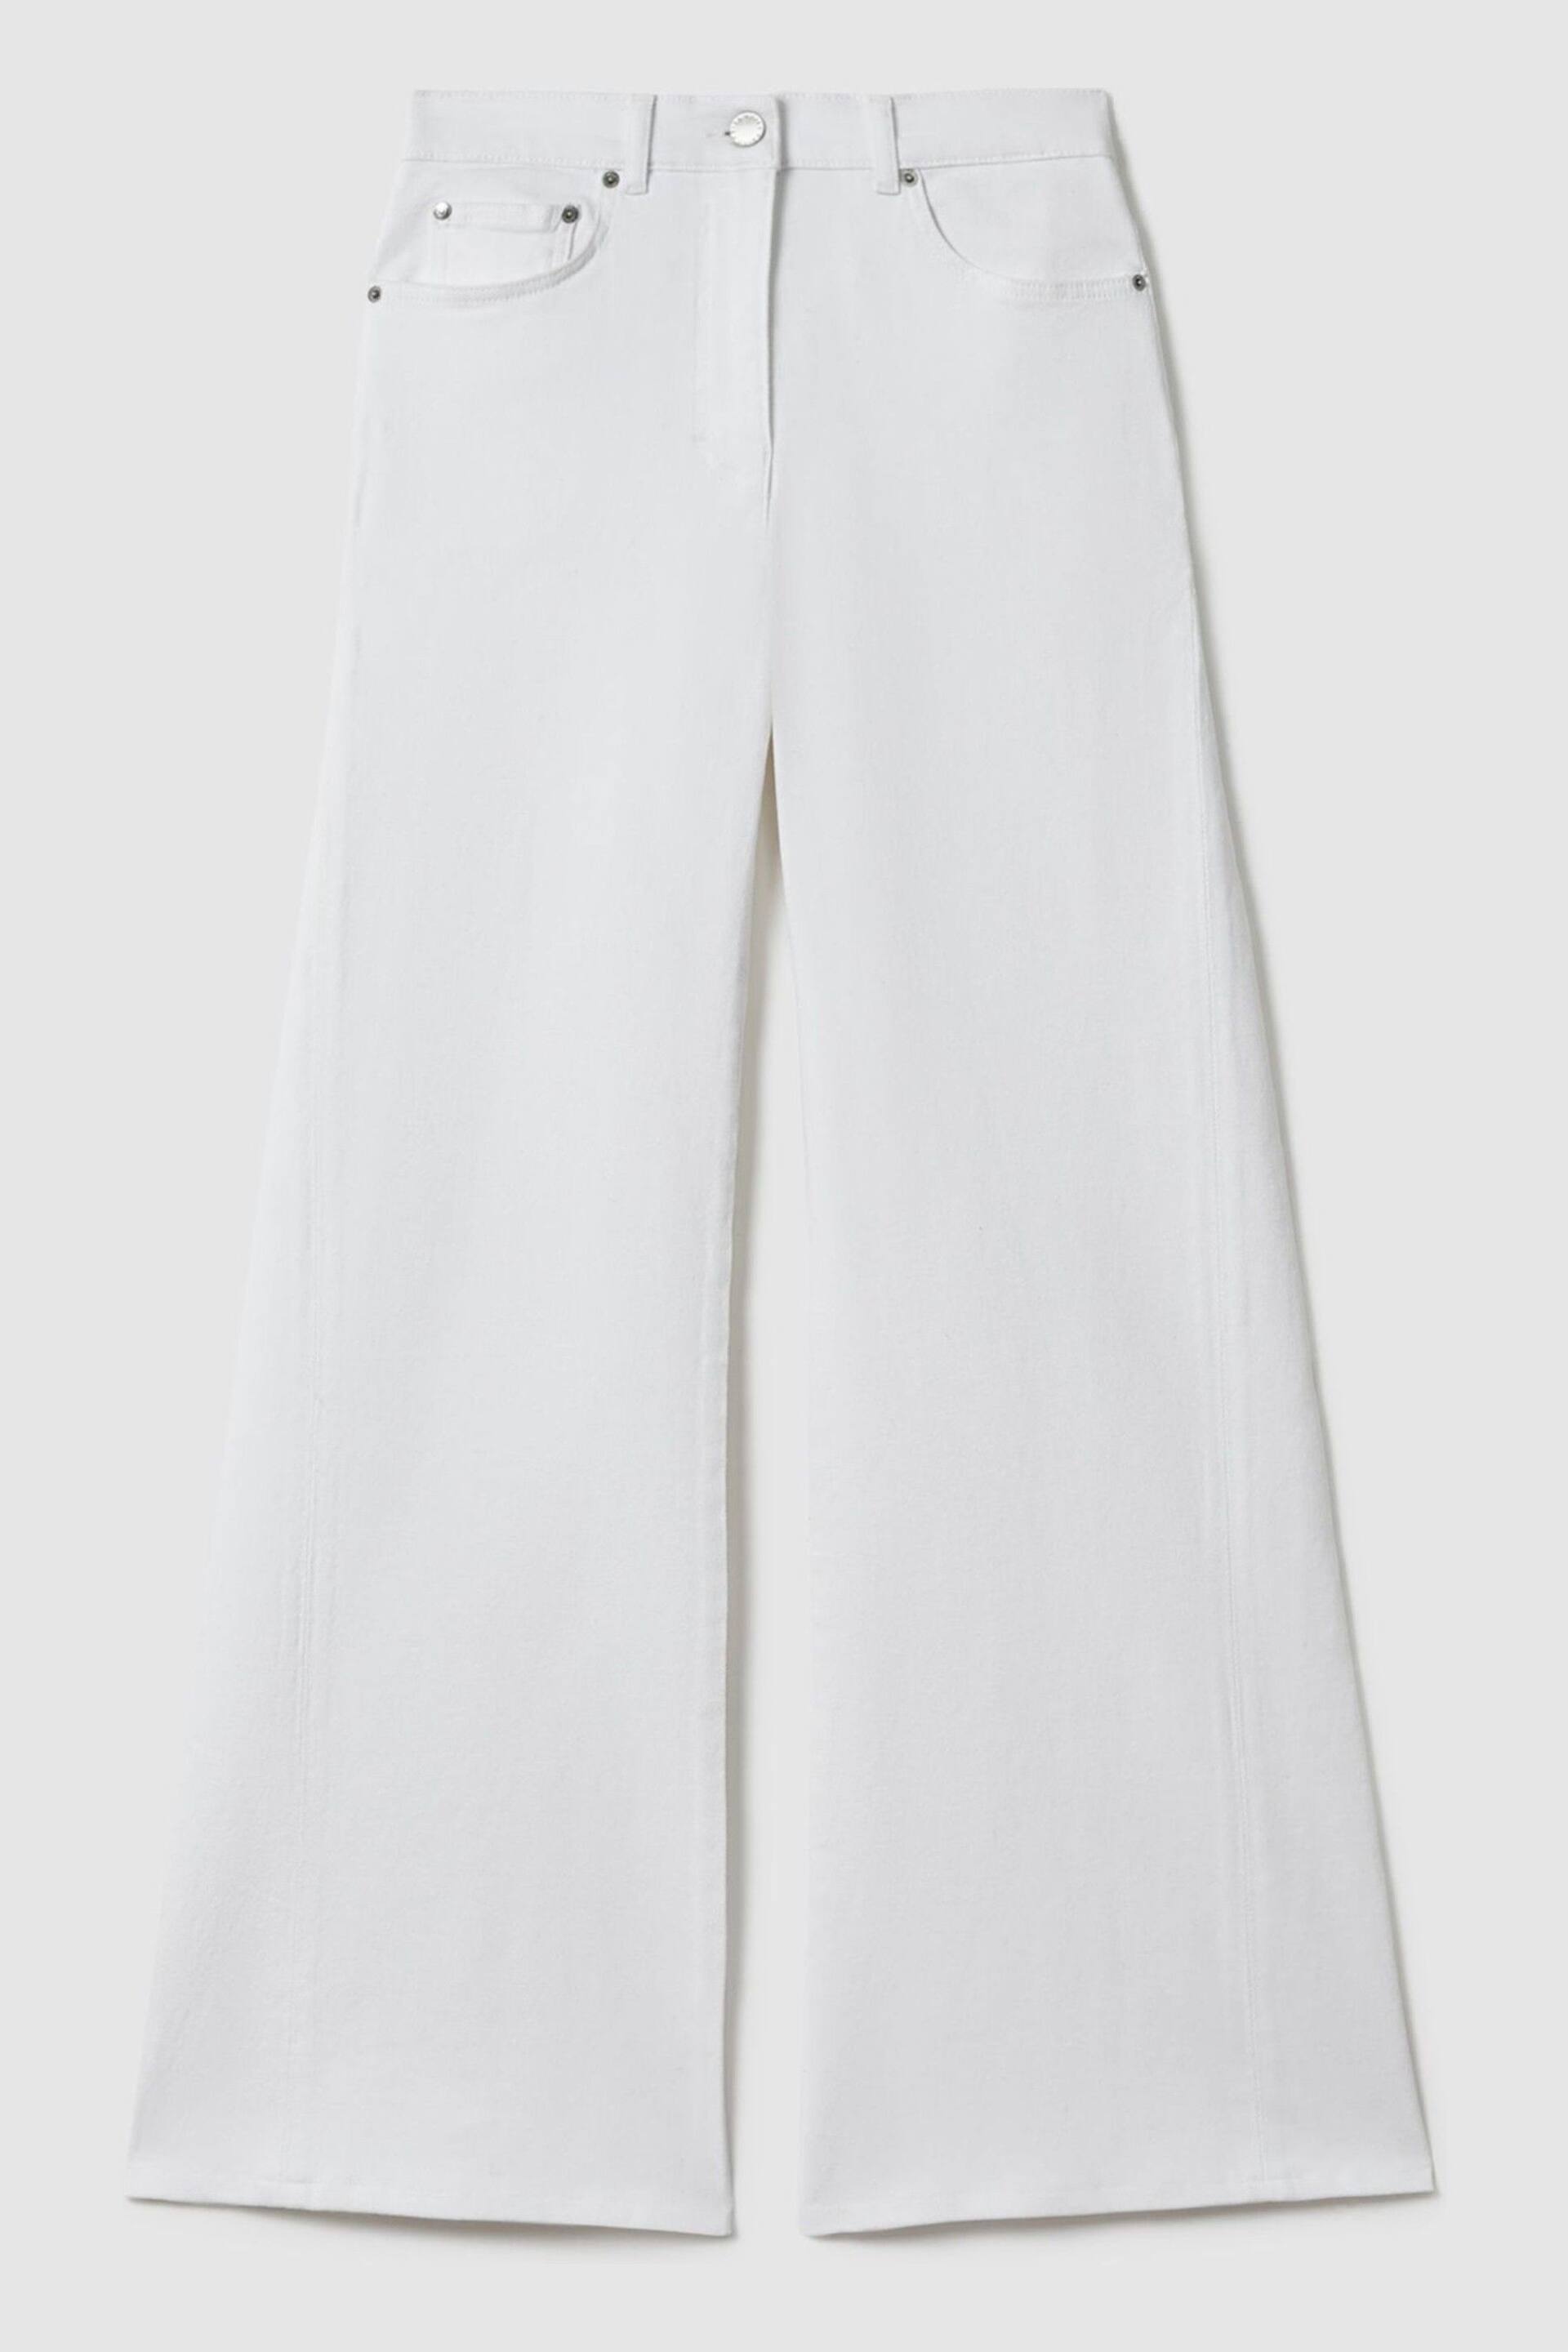 Reiss White Maize Flared Side Seam Jeans - Image 2 of 5